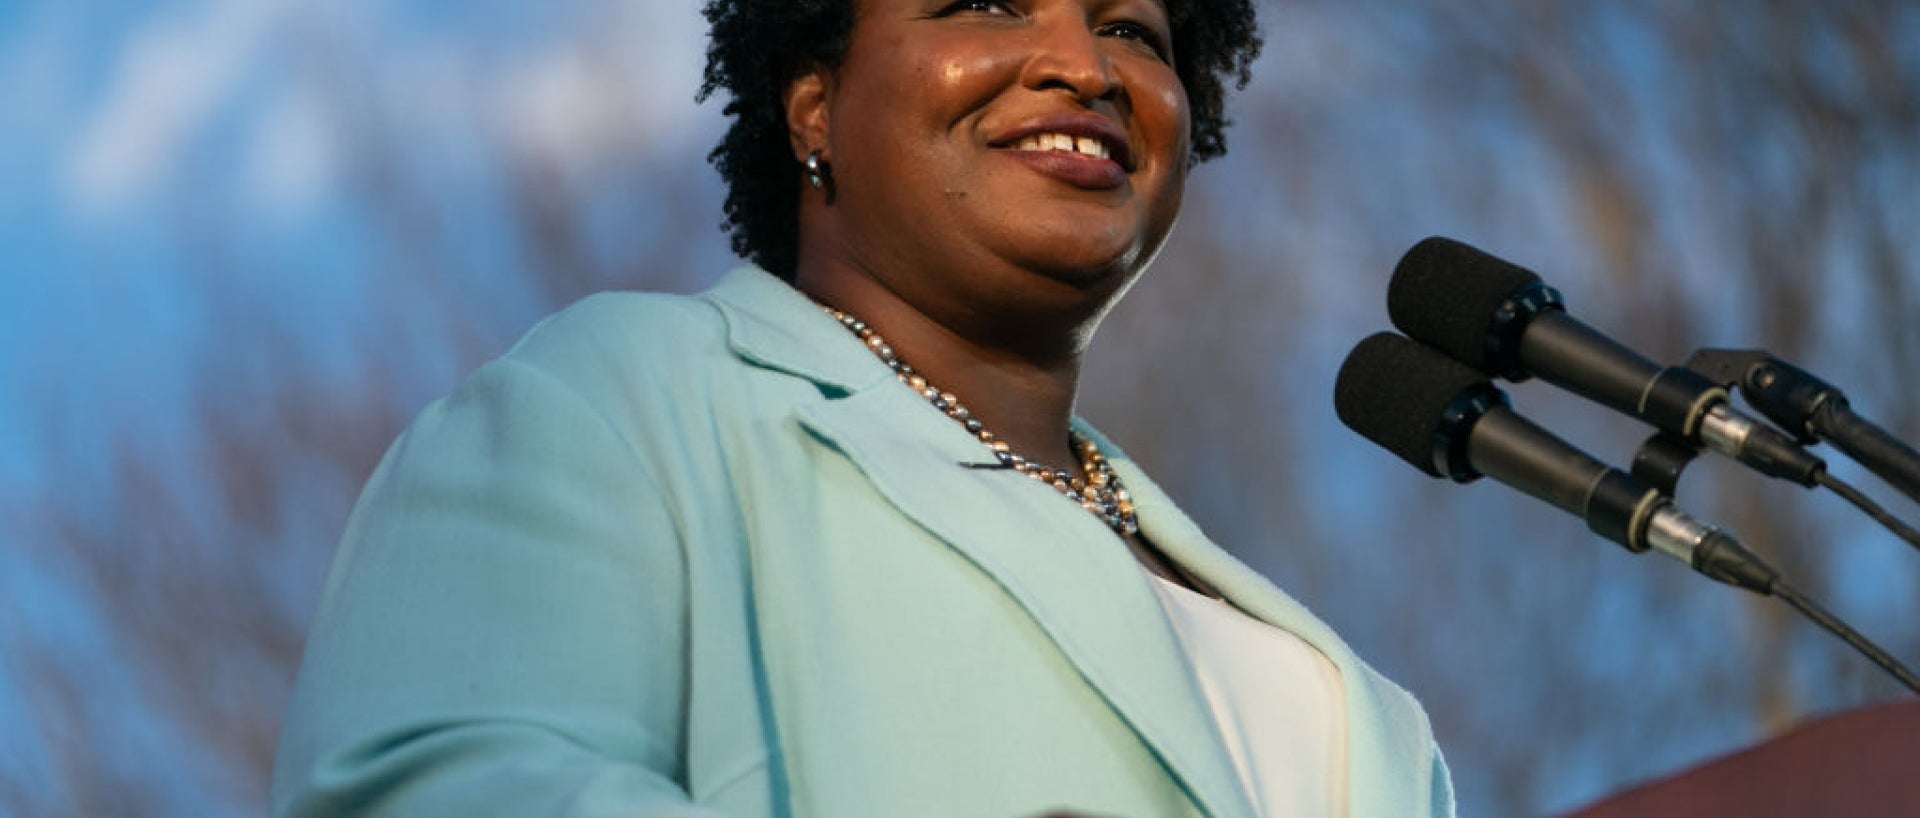 Stacey Abrams at a microphone smiling